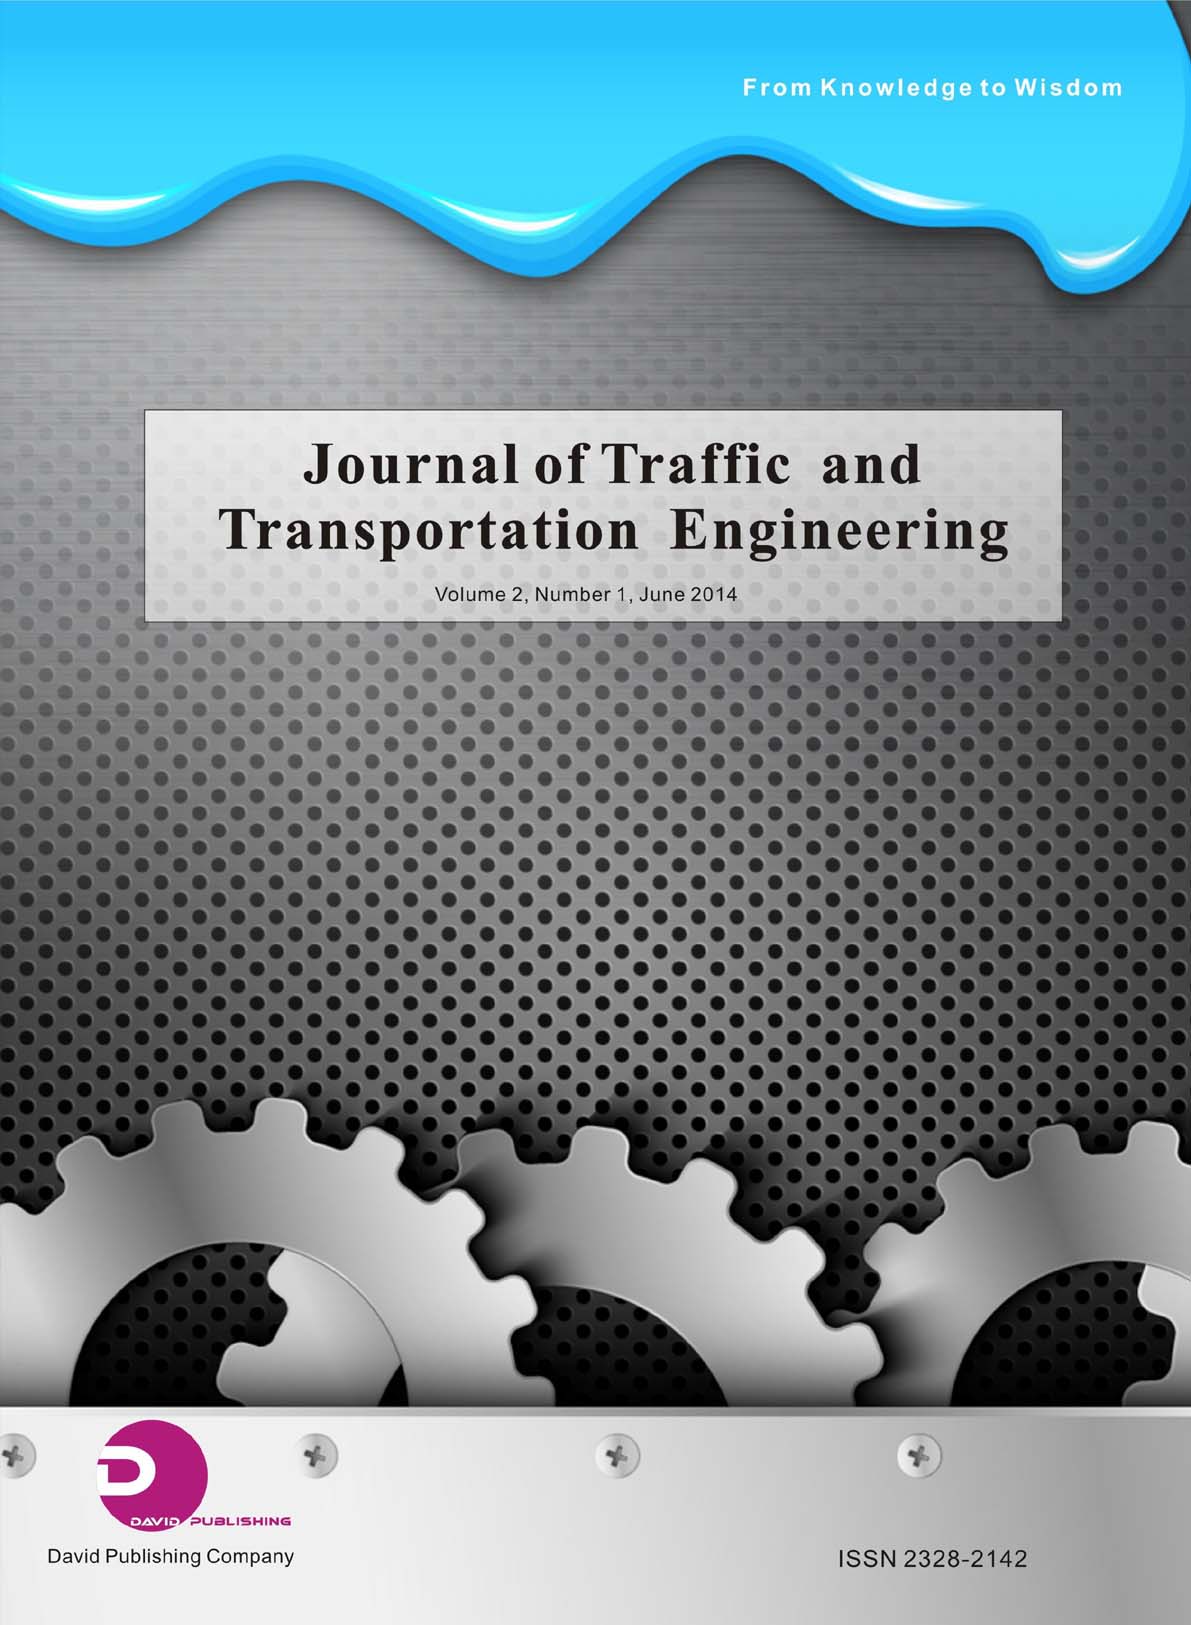 Journal of Traffic and Transportation Engineering